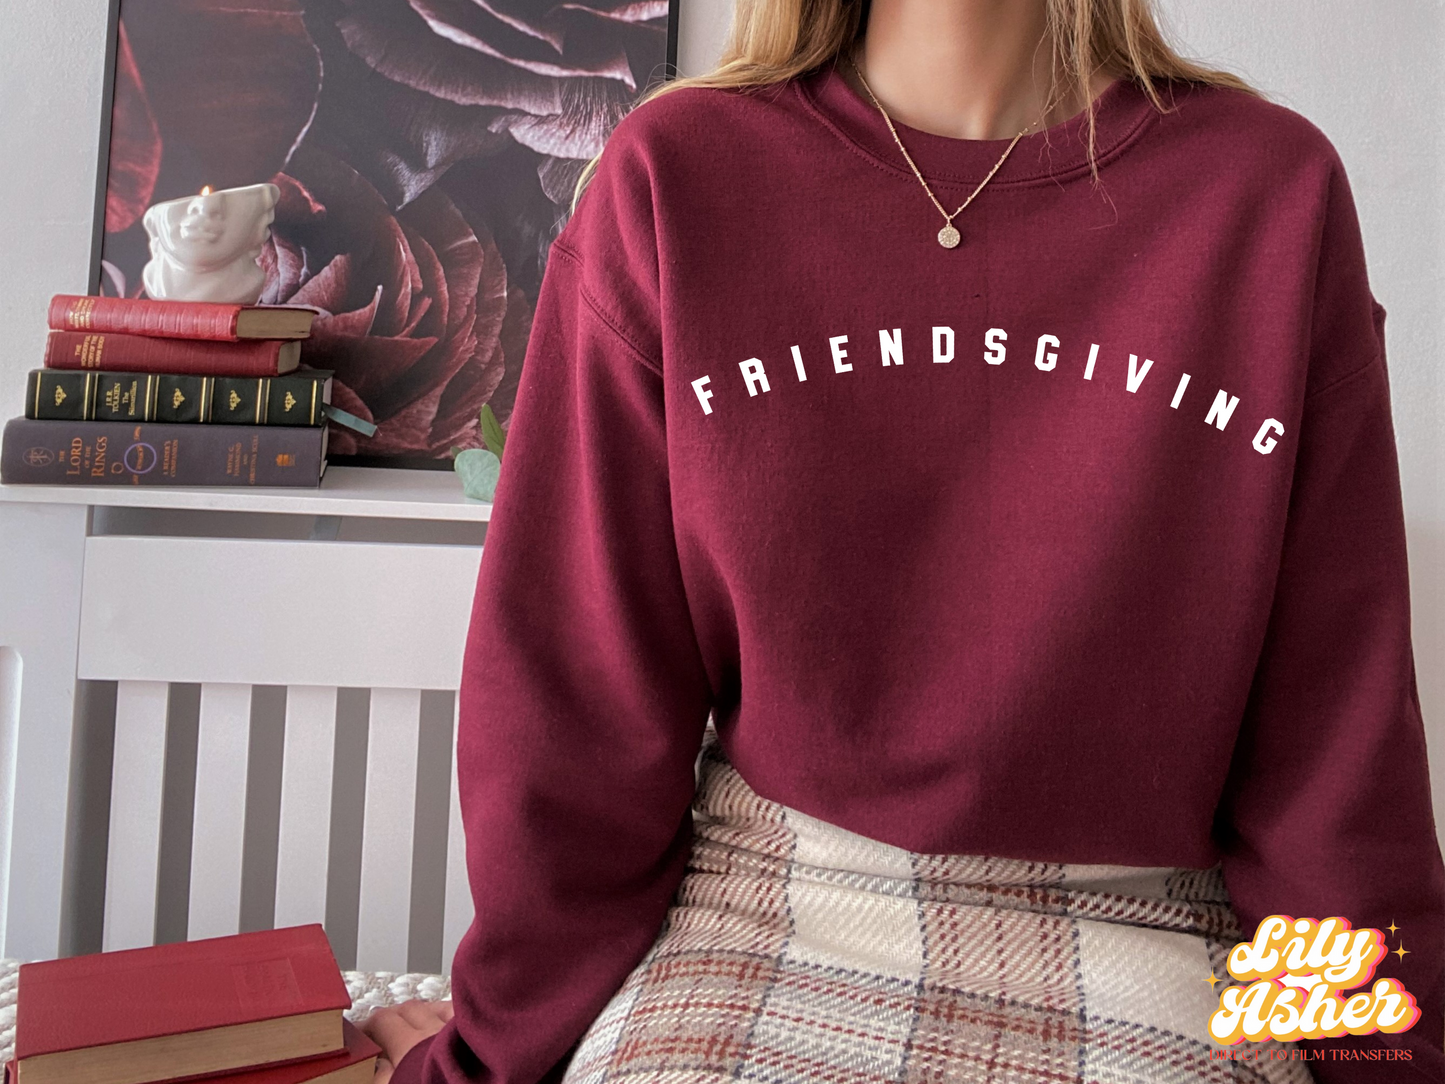 DTF FRIENDSGIVING CURVED TEXT TRANSFER